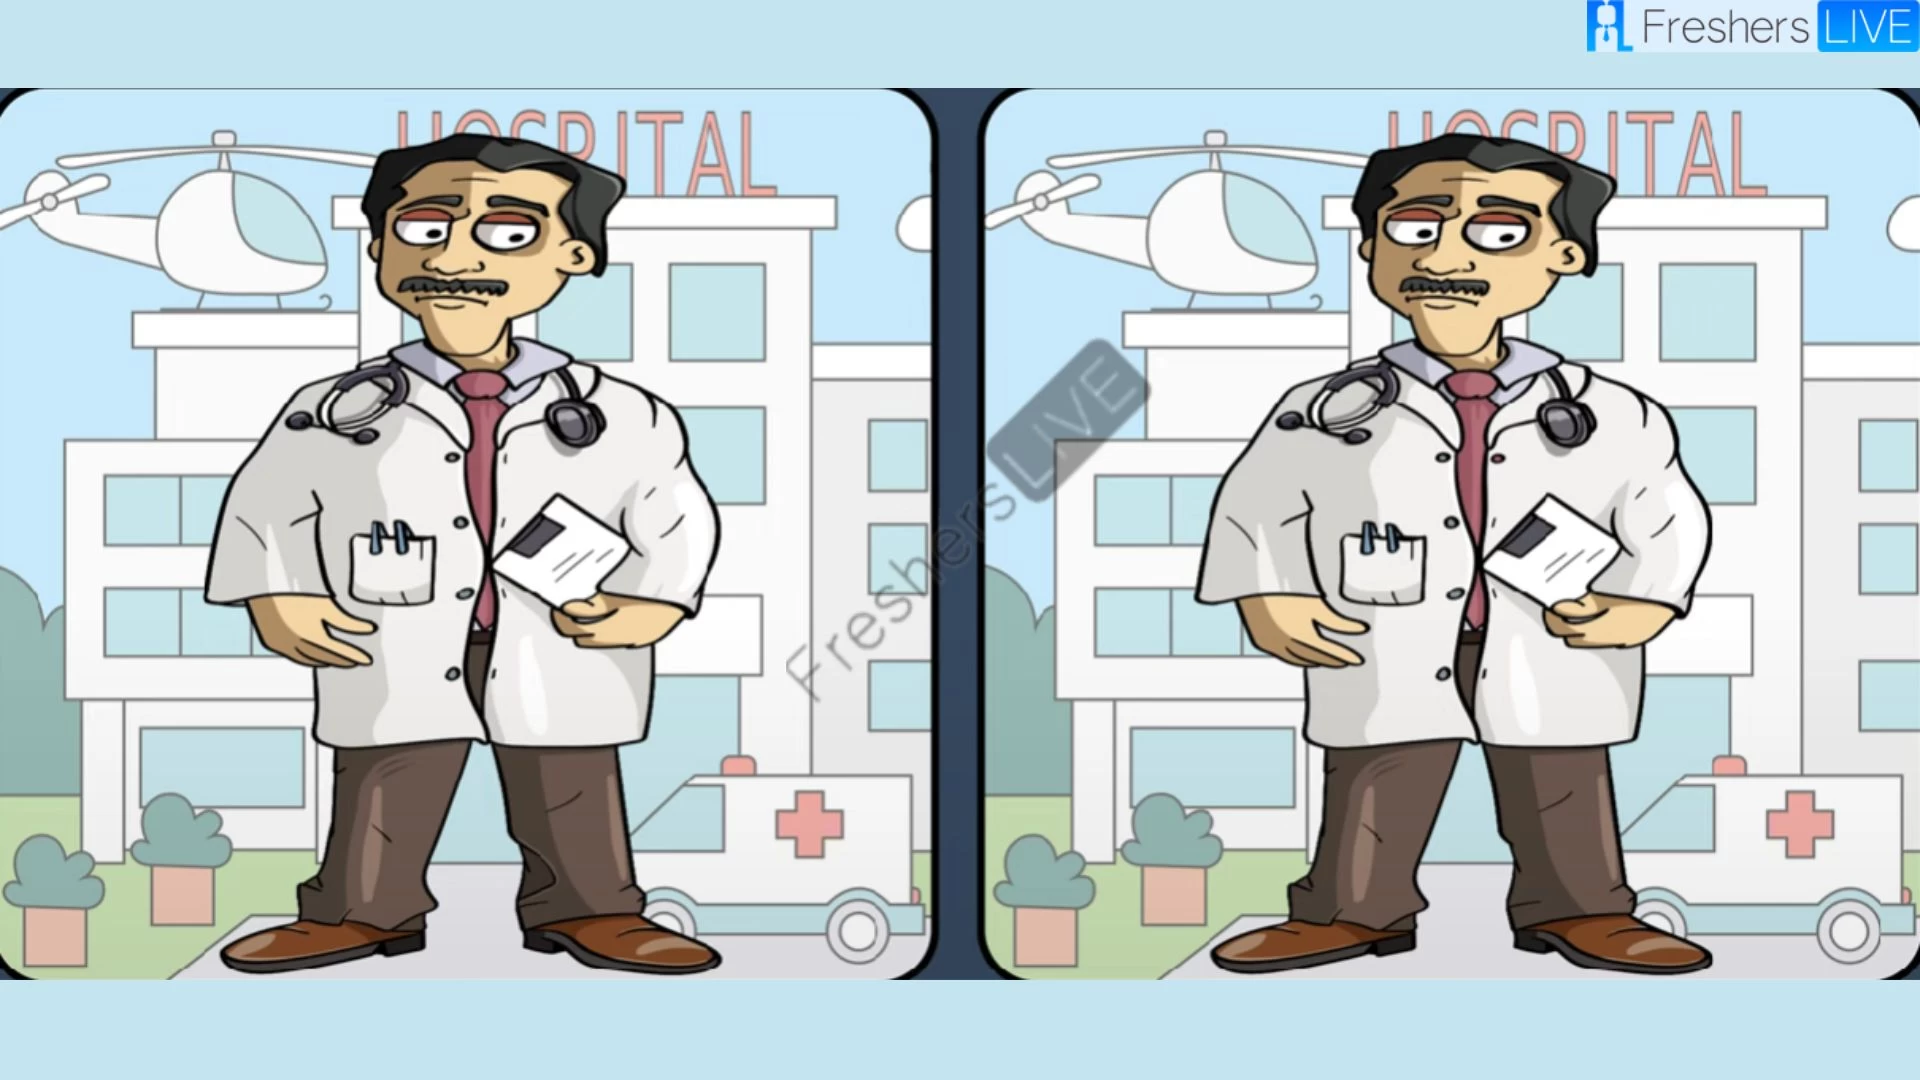 You have 20/20 vision if you can spot the 5 Differences in the Doctor Images